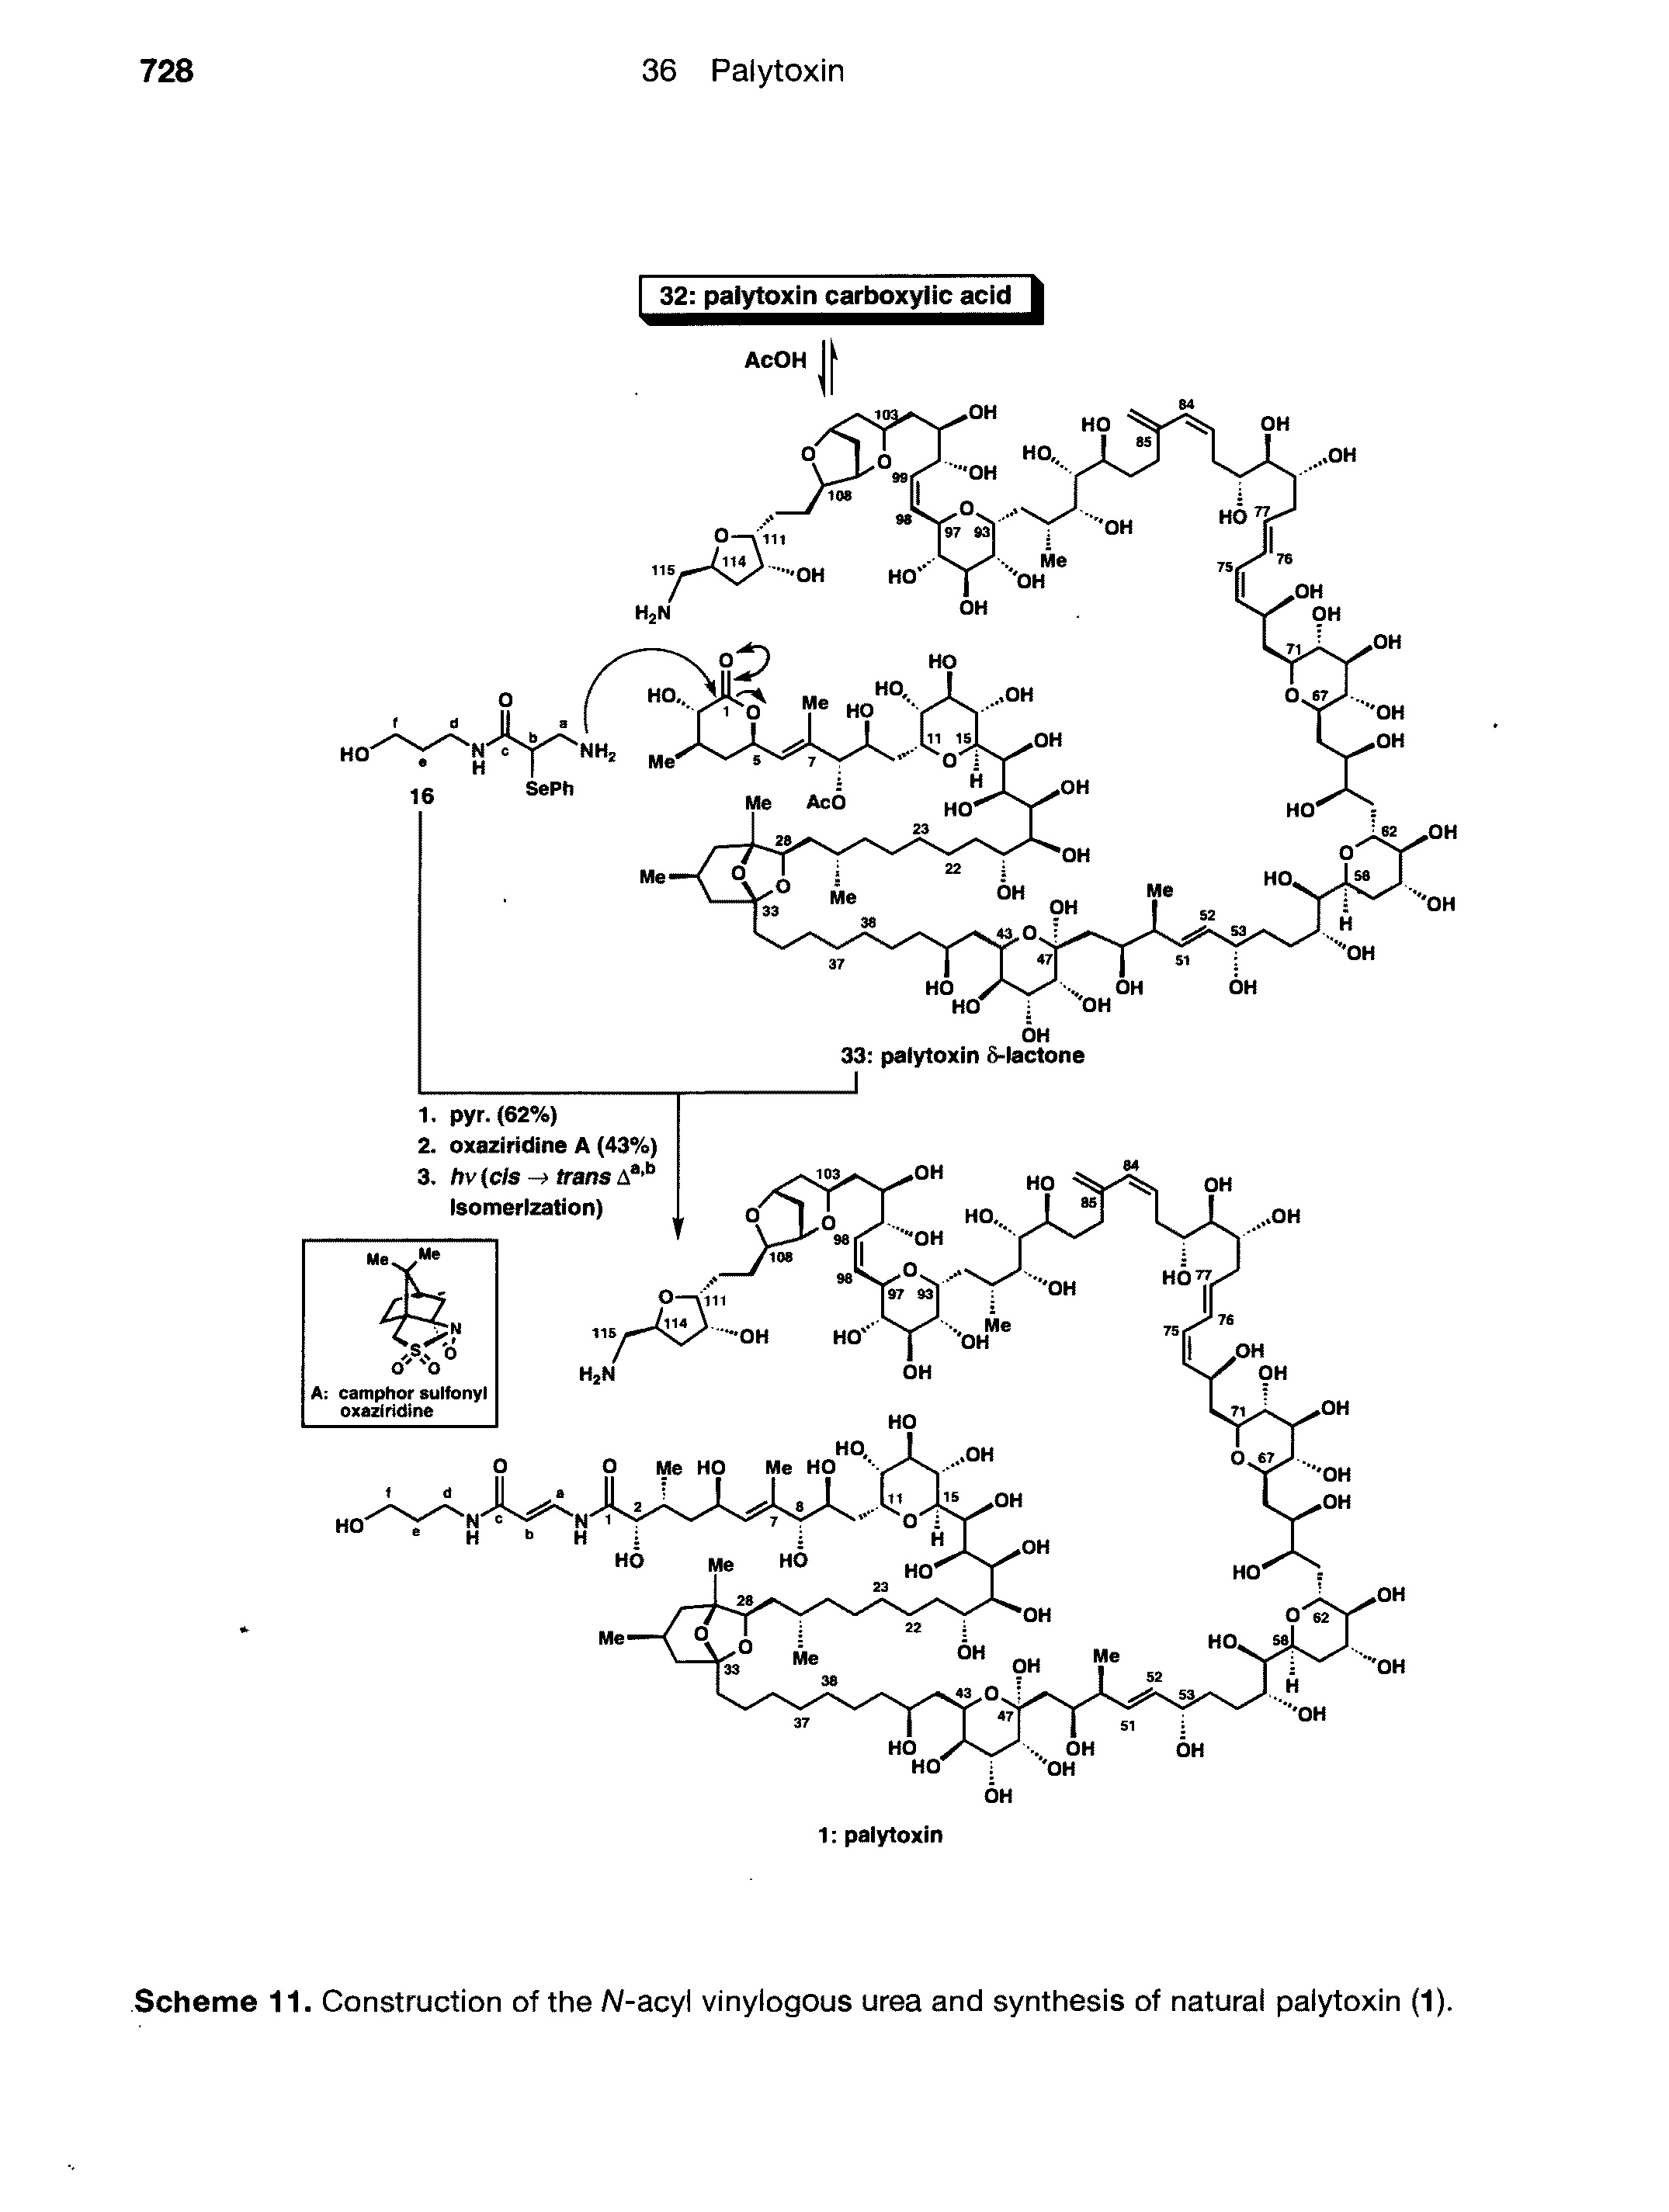 Scheme 11. Construction of the A/-acyl vinylogous urea and synthesis of natural palytoxin (1).